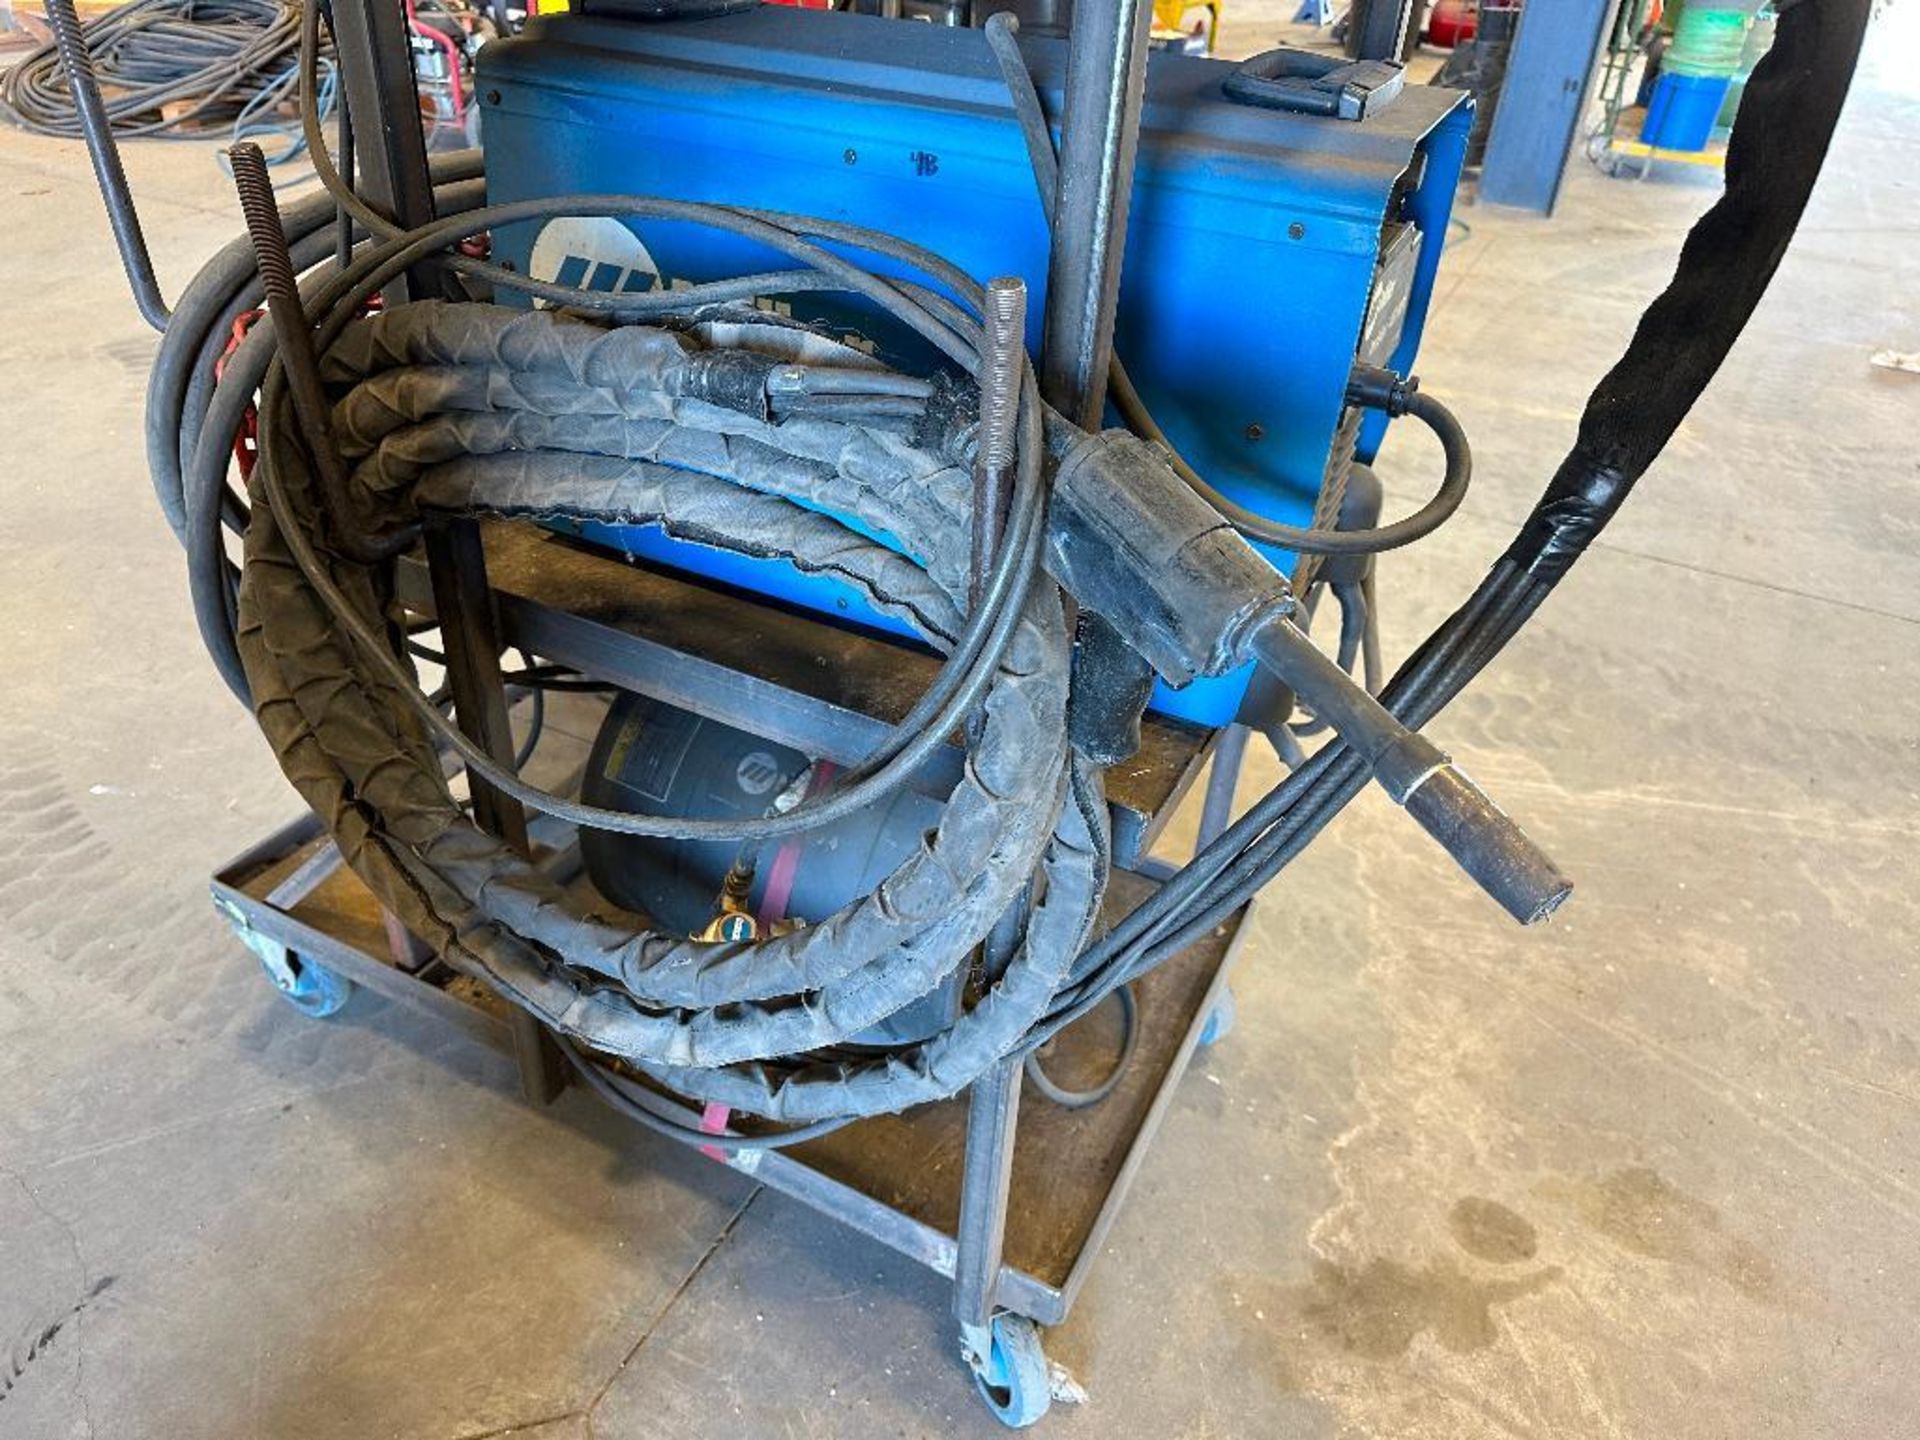 Lot of Miller Invision 450 MPa Welder, Miller XR Control Extended Reach Wire Feeder, Miller Pistol, - Image 10 of 13